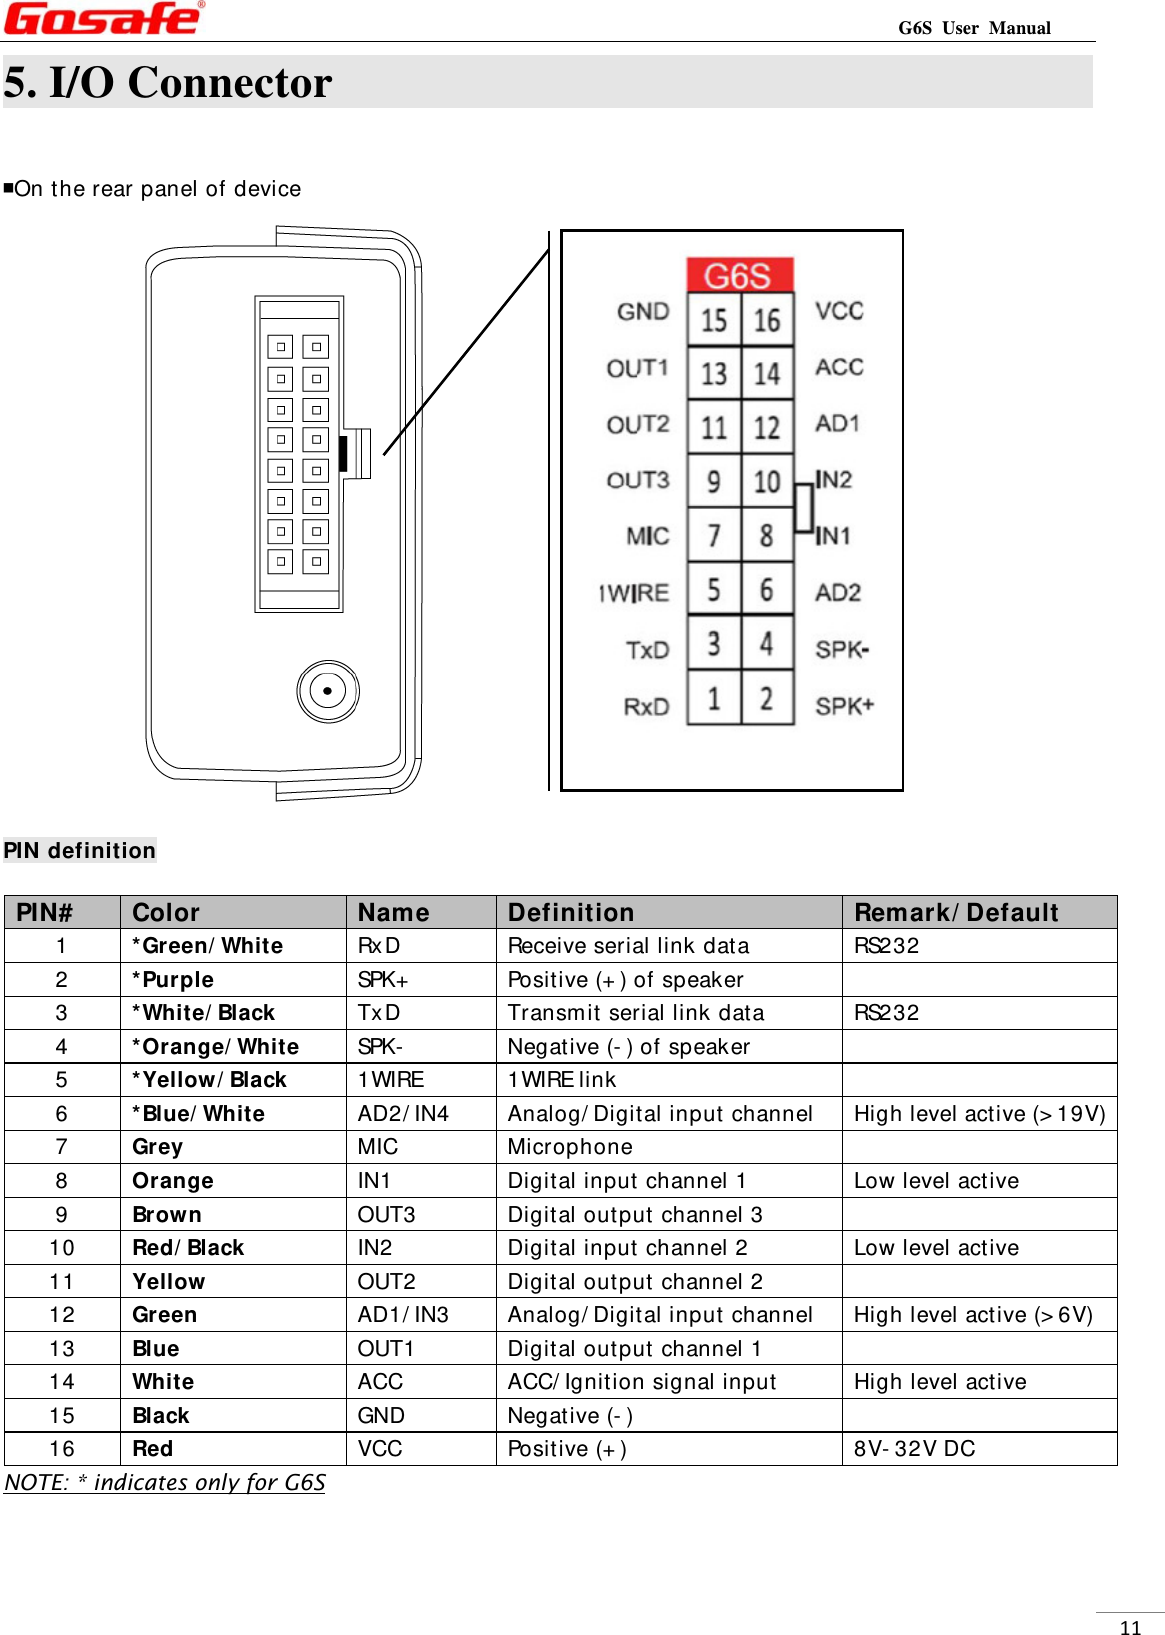                                                                           G6S User Manual  115. I/O Connector                                    ￭On the rear panel of device                PIN definition NOTE: * indicates only for G6S PIN#  Color  Name  Definition  Remark/ Default 1  *Green/ White  RxD  Receive serial link data  RS232 2  *Purple  SPK+   Positive (+ ) of speaker   3  *White/ Black  Tx D  Transmit serial link data  RS232 4  *Orange/ White  SPK-   Negative (- ) of speaker   5  *Yellow/ Black  1WIRE 1WIRE link   6  *Blue/ White  AD2/ IN4  Analog/ Digital input channel  High level active (&gt; 19V)7  Grey  MIC Microphone   8  Orange  IN1  Digital input channel 1  Low level active 9  Brown  OUT3  Digital output channel 3   10  Red/ Black  IN2  Digital input channel 2  Low level active 11  Yellow  OUT2  Digital output channel 2   12  Green  AD1/ IN3  Analog/ Digital input channel  High level active (&gt; 6V) 13  Blue  OUT1  Digital output channel 1   14  White  ACC  ACC/ Ignition signal input  High level active 15  Black  GND Negative (- )   16  Red  VCC  Positive (+ )  8V- 32V DC 